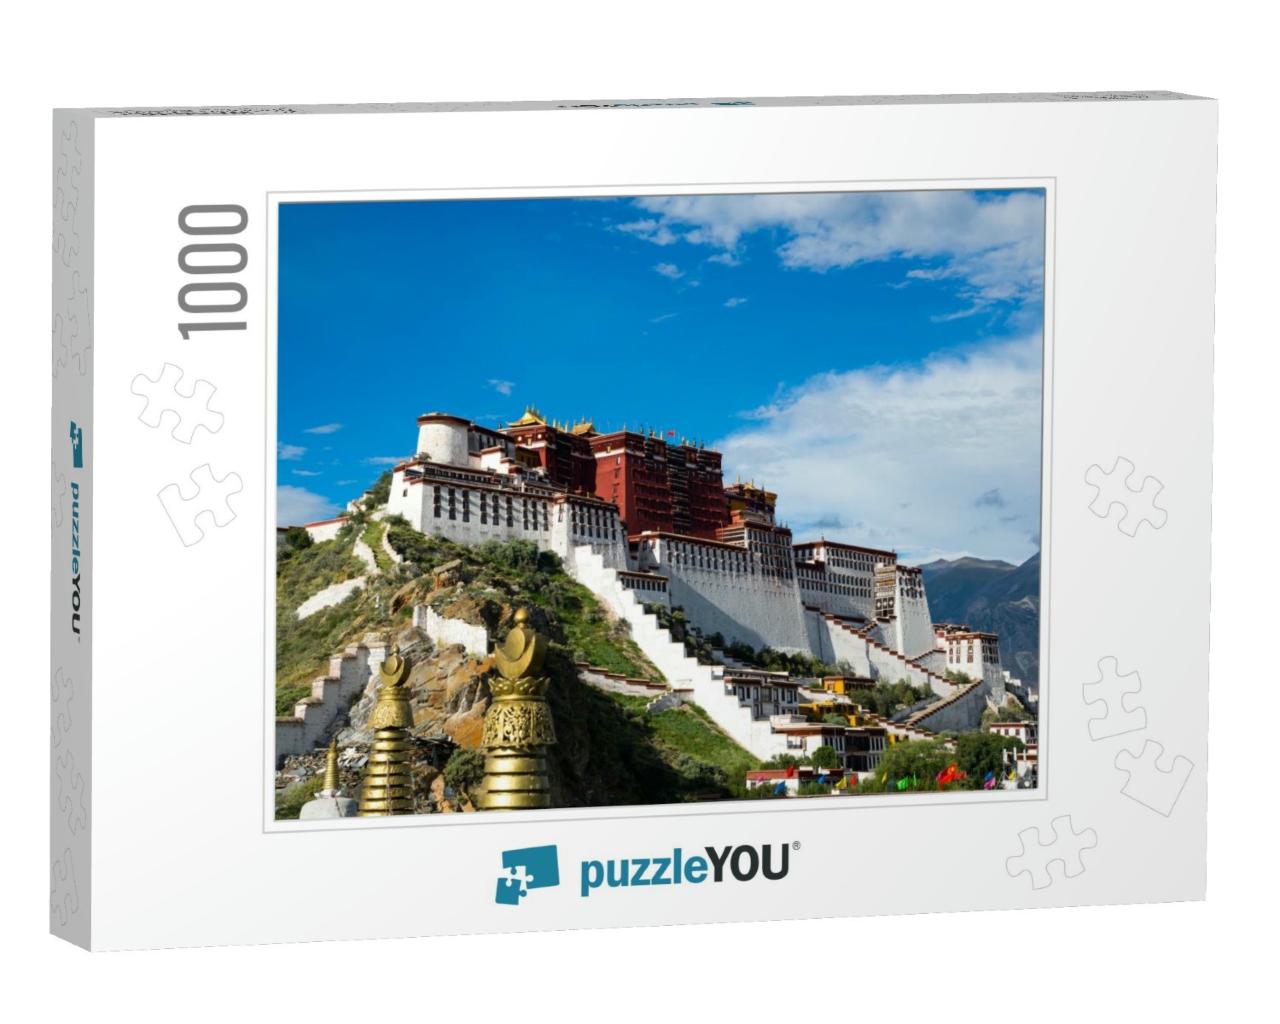 Potala Palace in Lhasa, Tibet. Potala Palace is Now a Mus... Jigsaw Puzzle with 1000 pieces